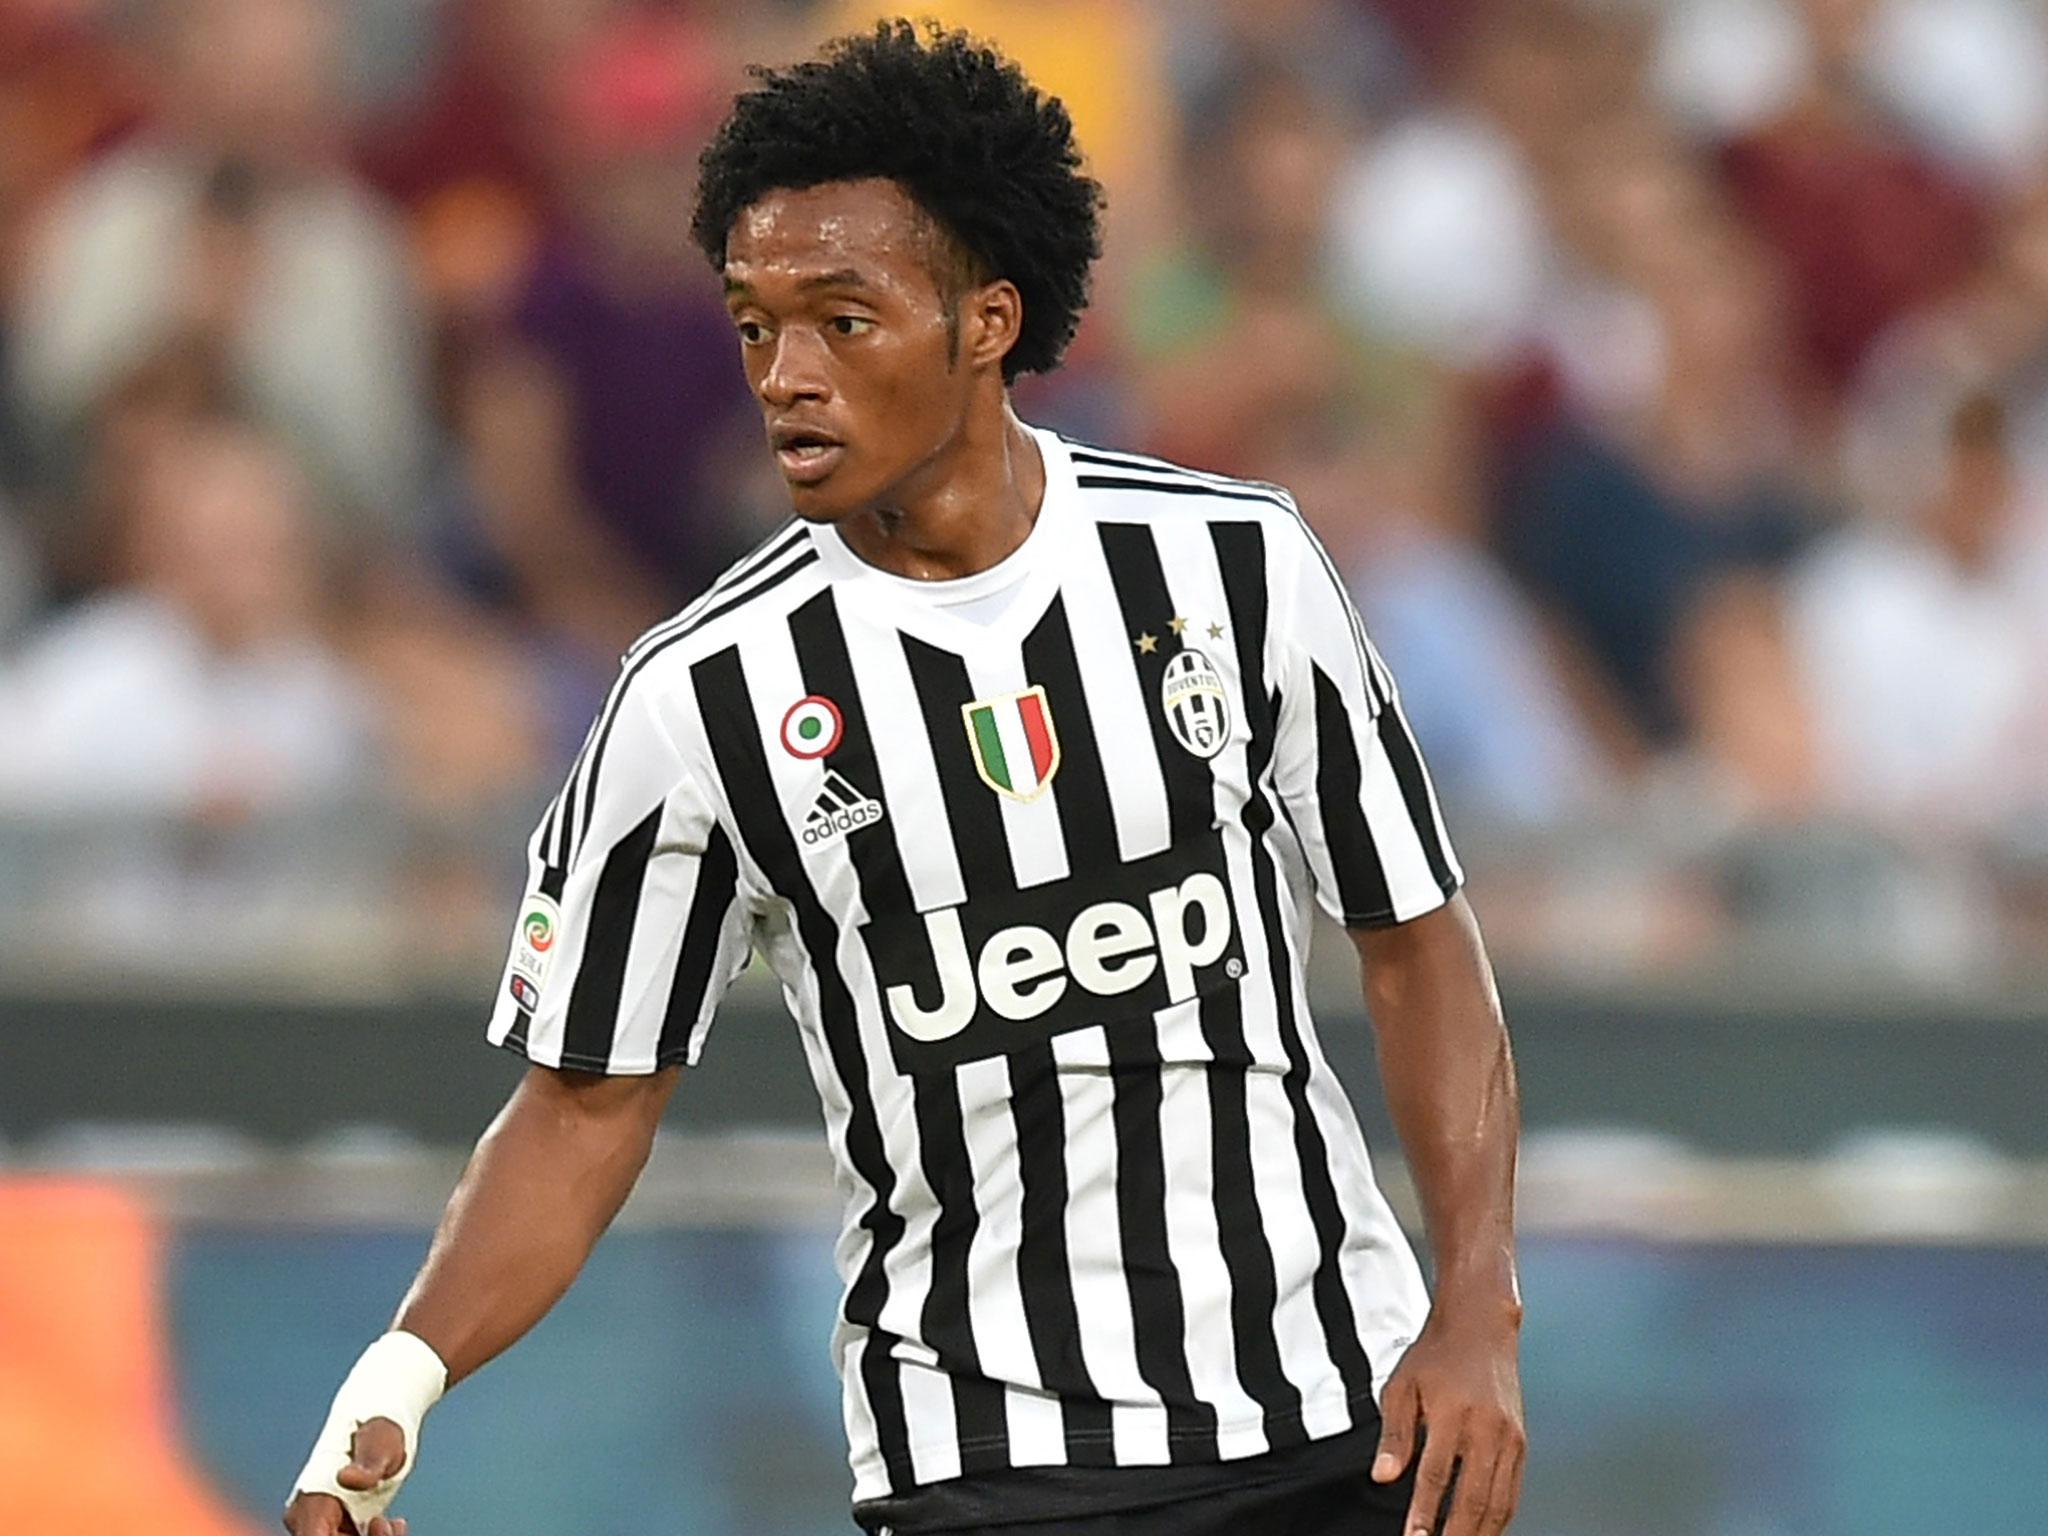 &#13;
Cuadrado spent the 2015/16 season on loan with Conte's former club Juventus (Reuters)&#13;